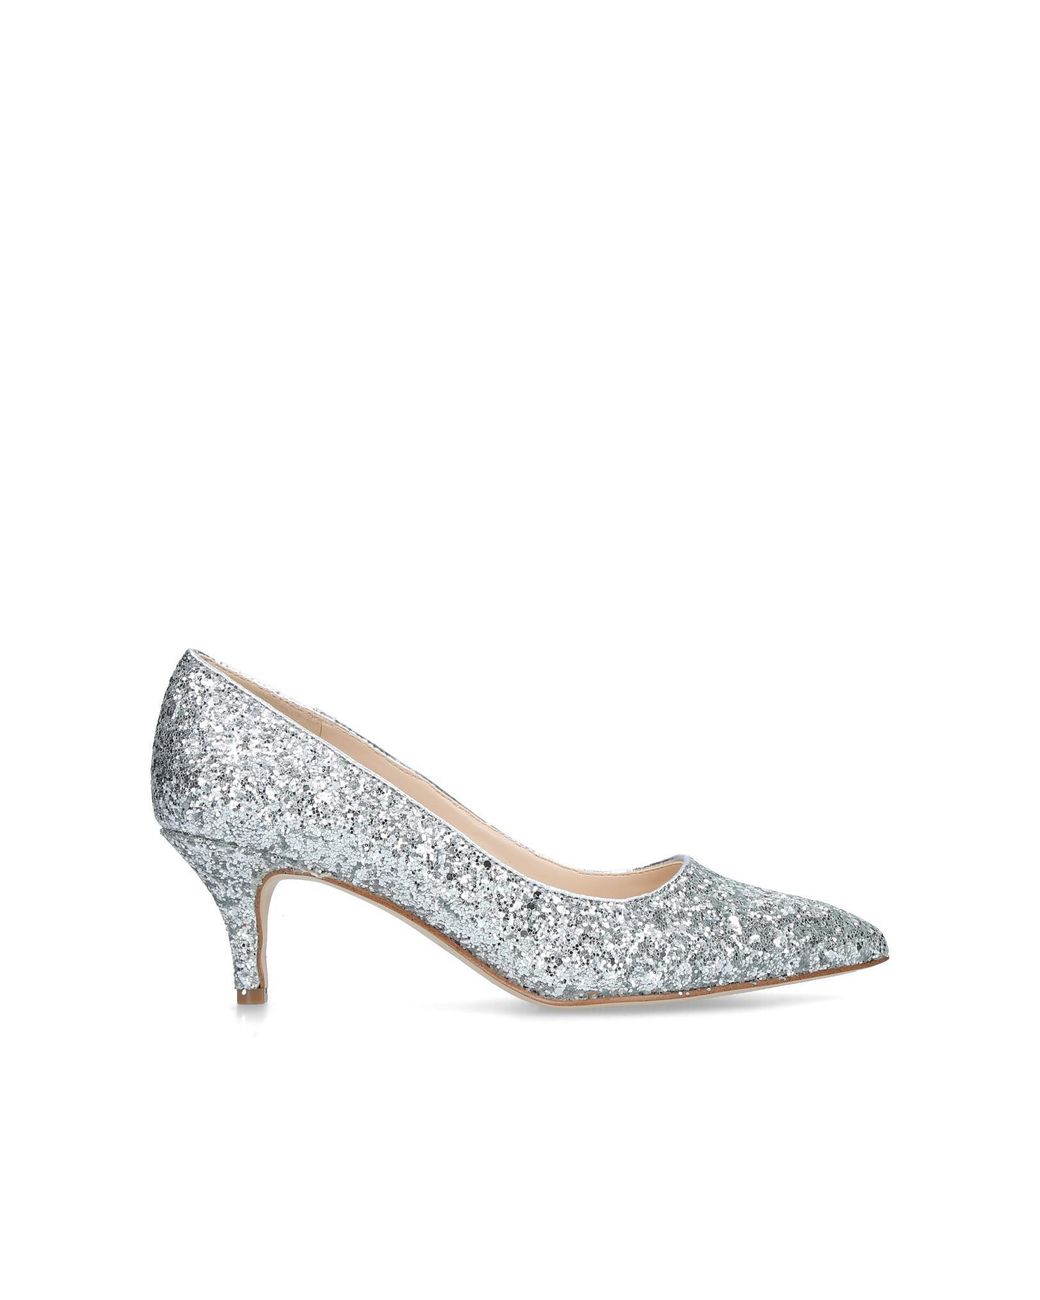 Sparkly Silver Bridal Shoes Stiletto Heels Wedding Shoes Glitter Pumps With  Ankle Strap